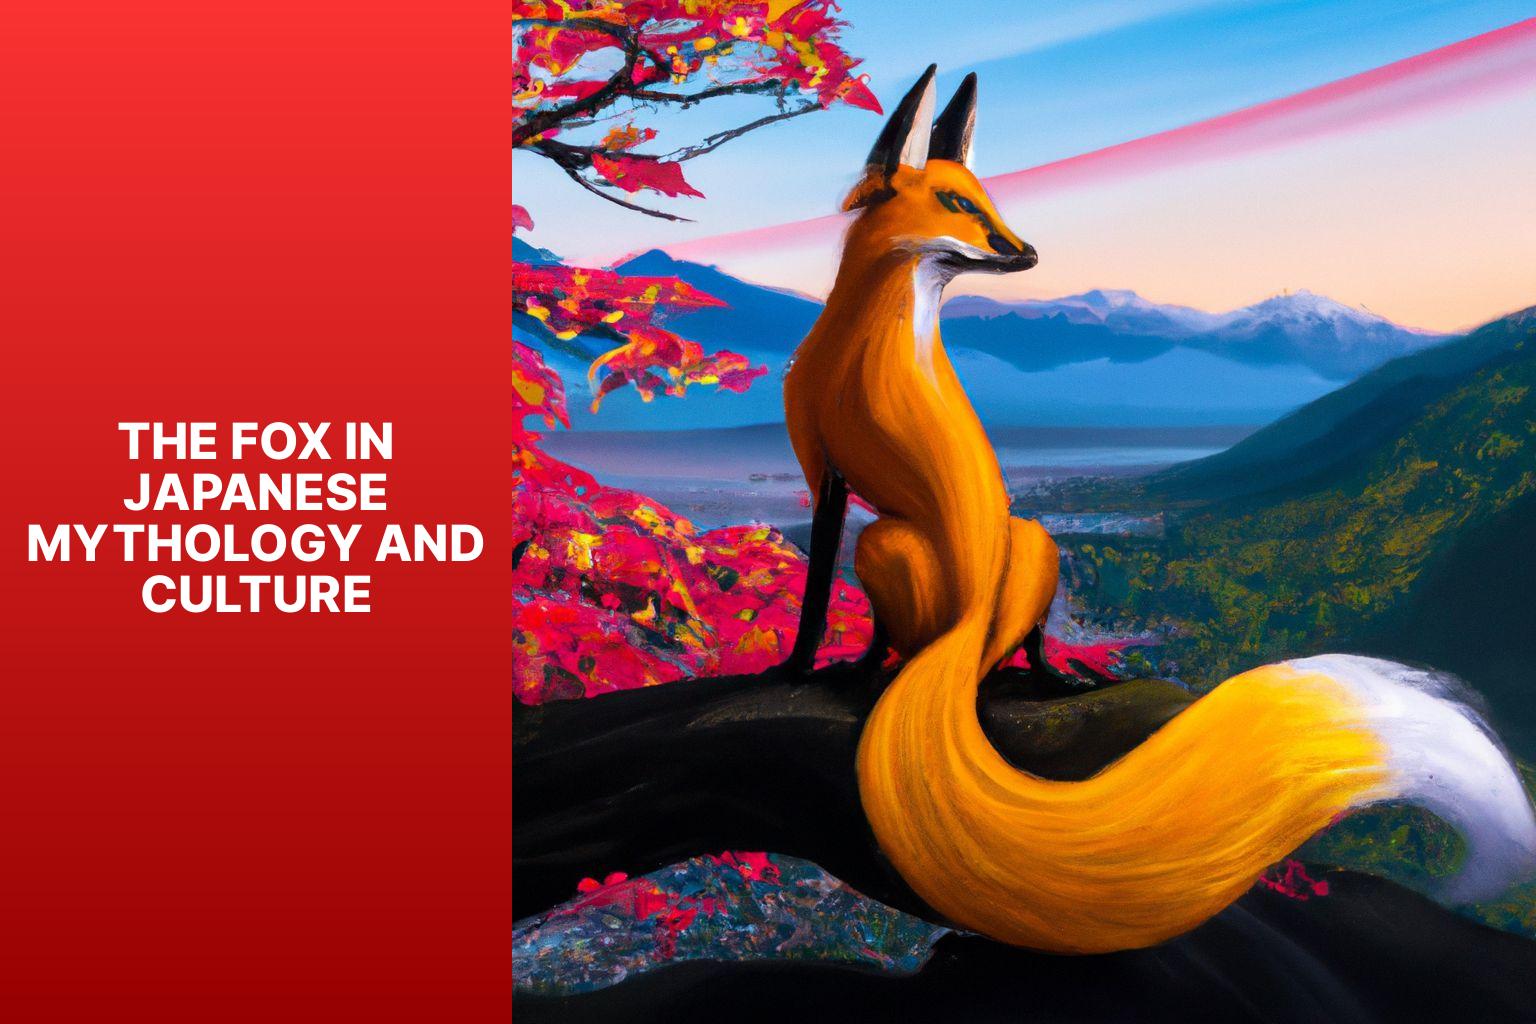 The Fox in Japanese Mythology and Culture - Fox Myths and Legends in Japan 